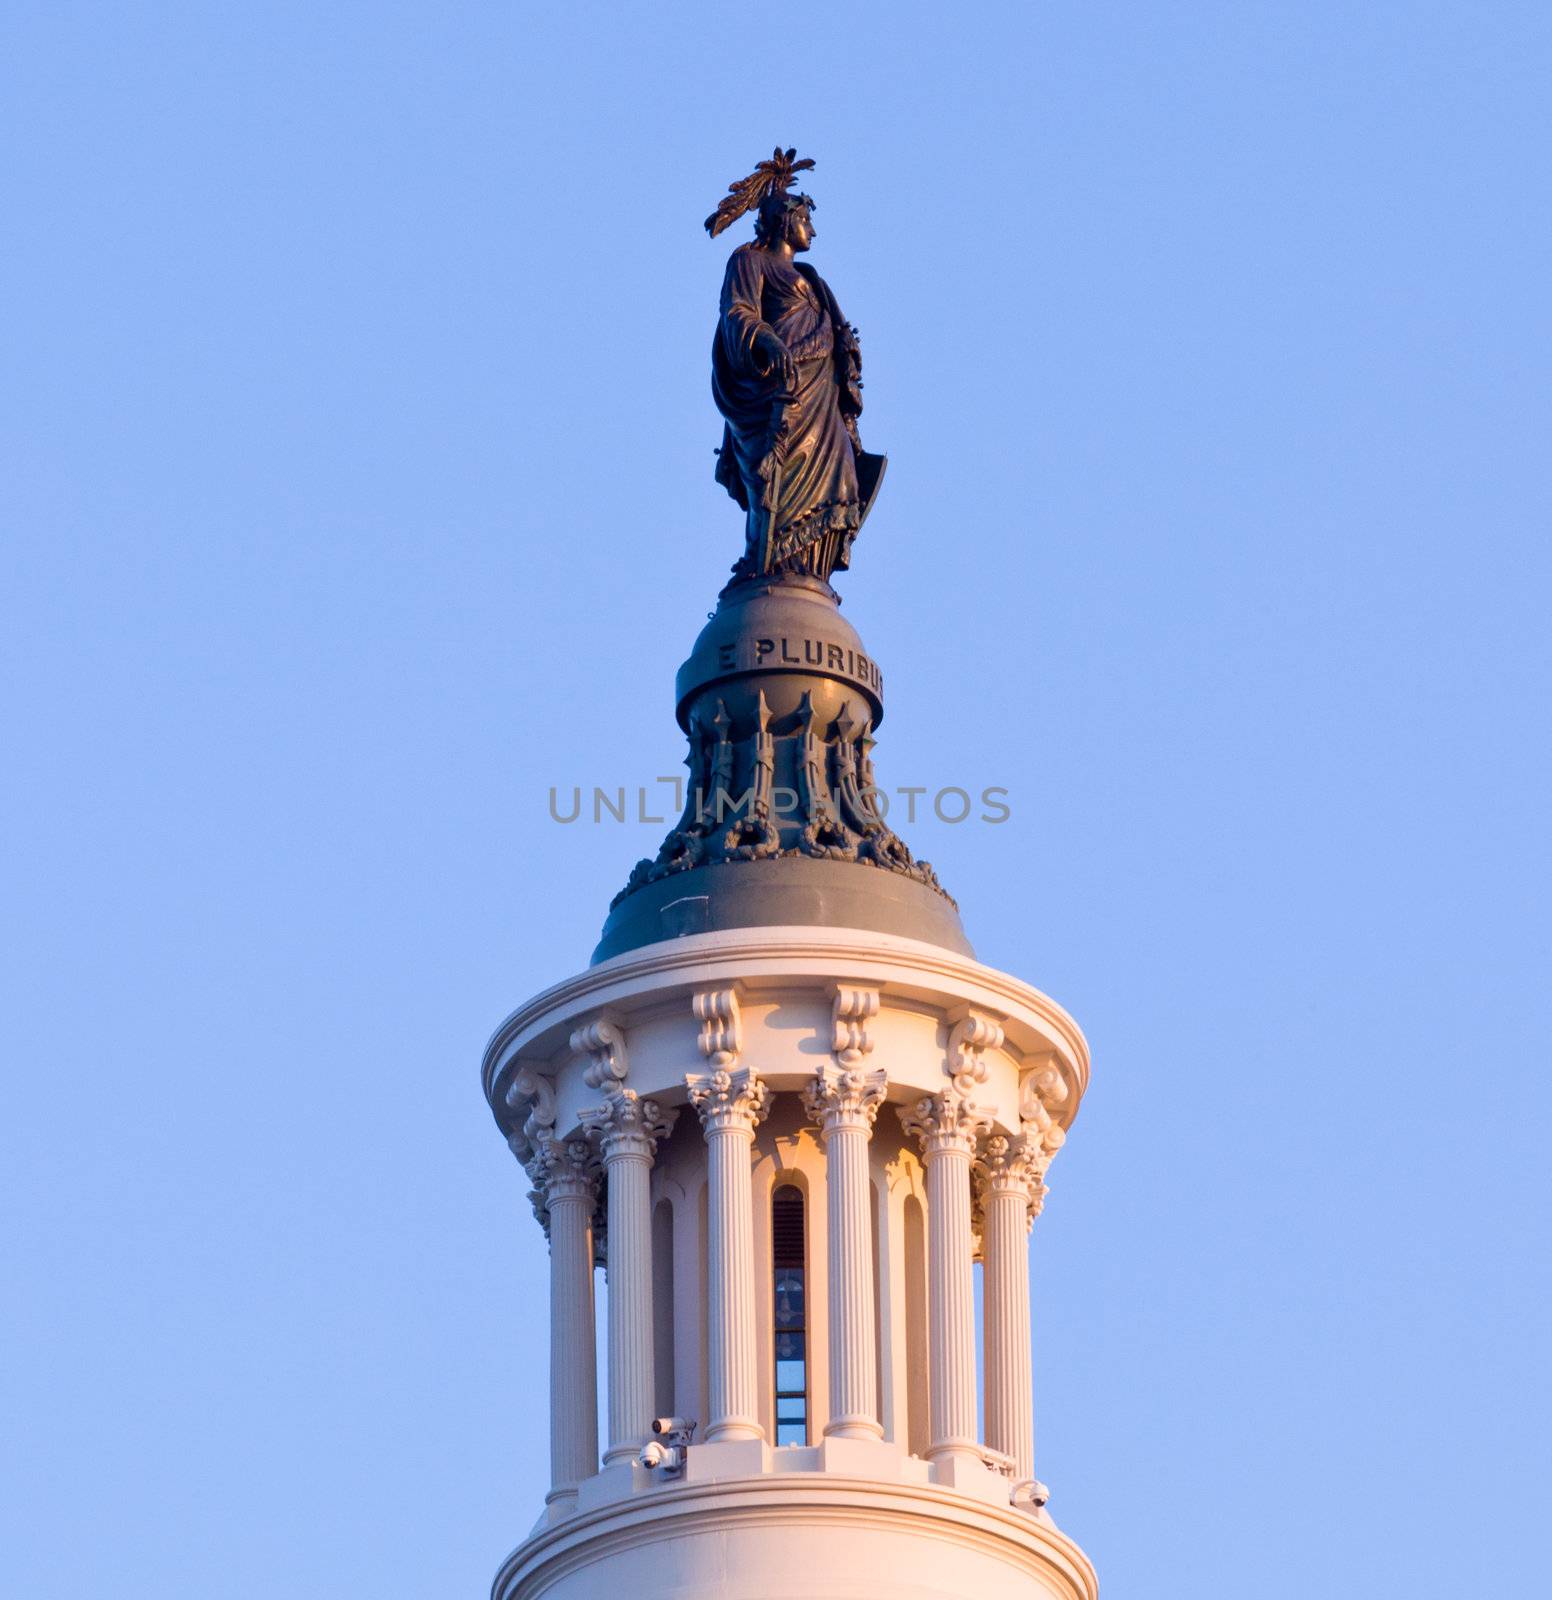 Sunrise behind the Statue of Freedom in DC by steheap